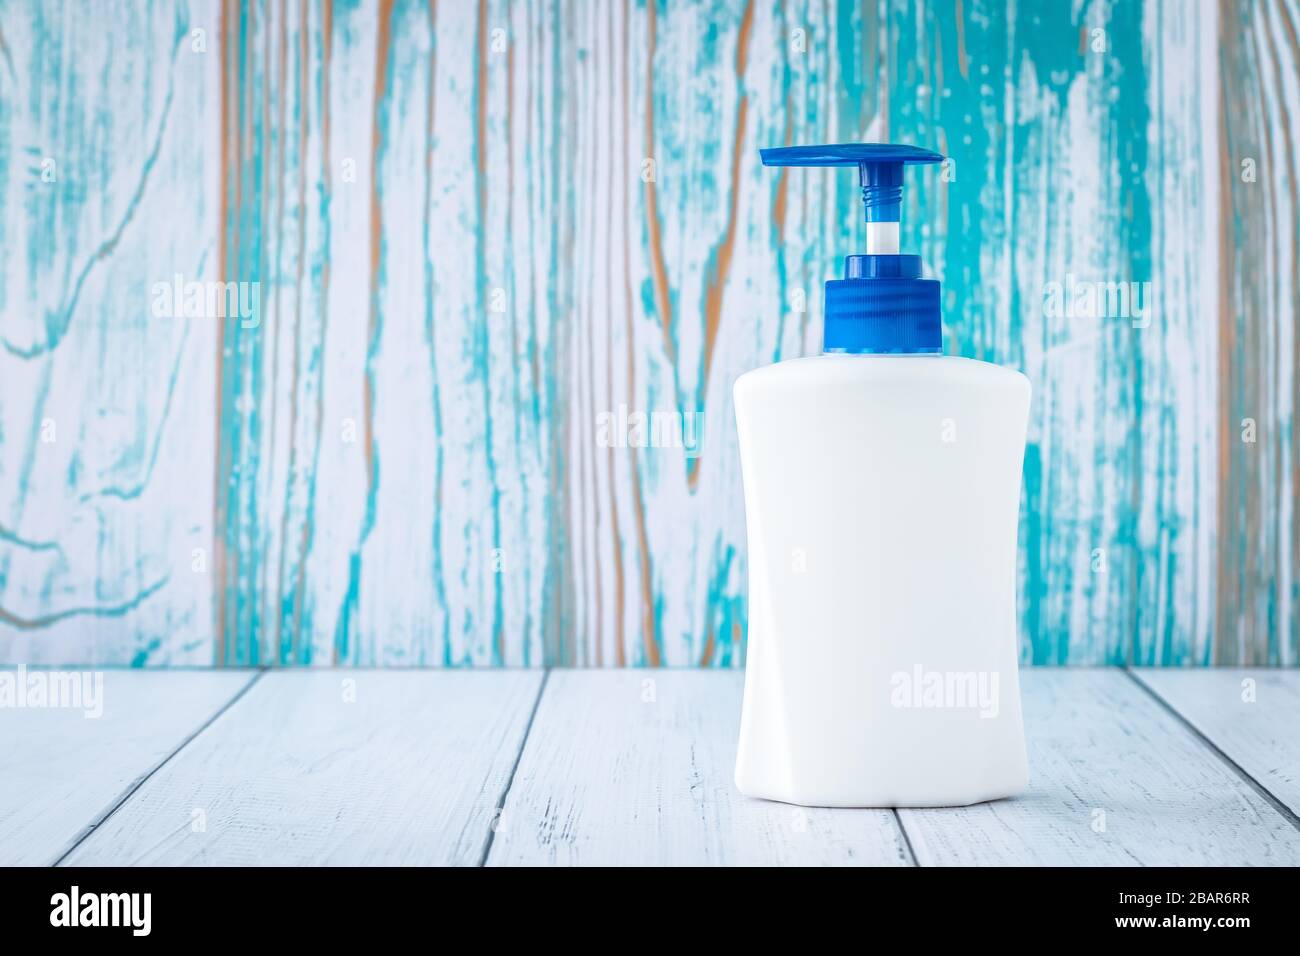 Antibacterial liquid soap with dispenser in bathroom. Disinfection concept. Protection from flu viruses, sanitizer, gel in white bottle on blue wooden Stock Photo